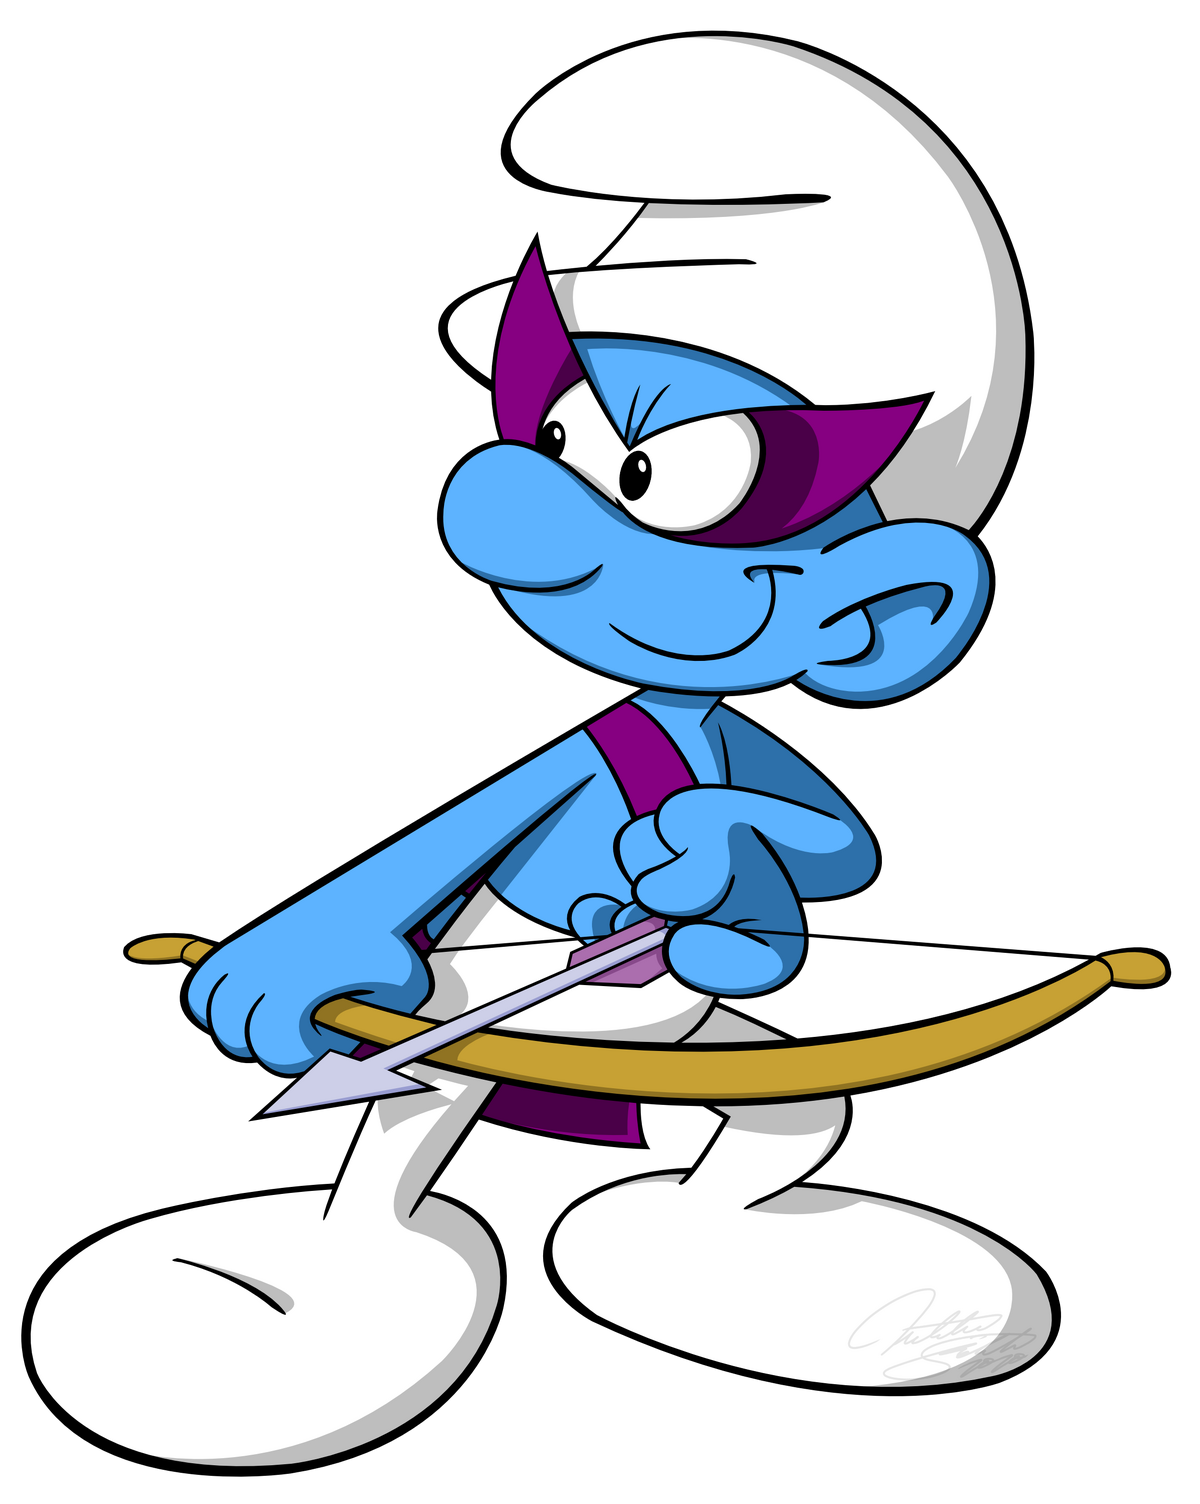 Smurf Lover – Lend A Hand Up